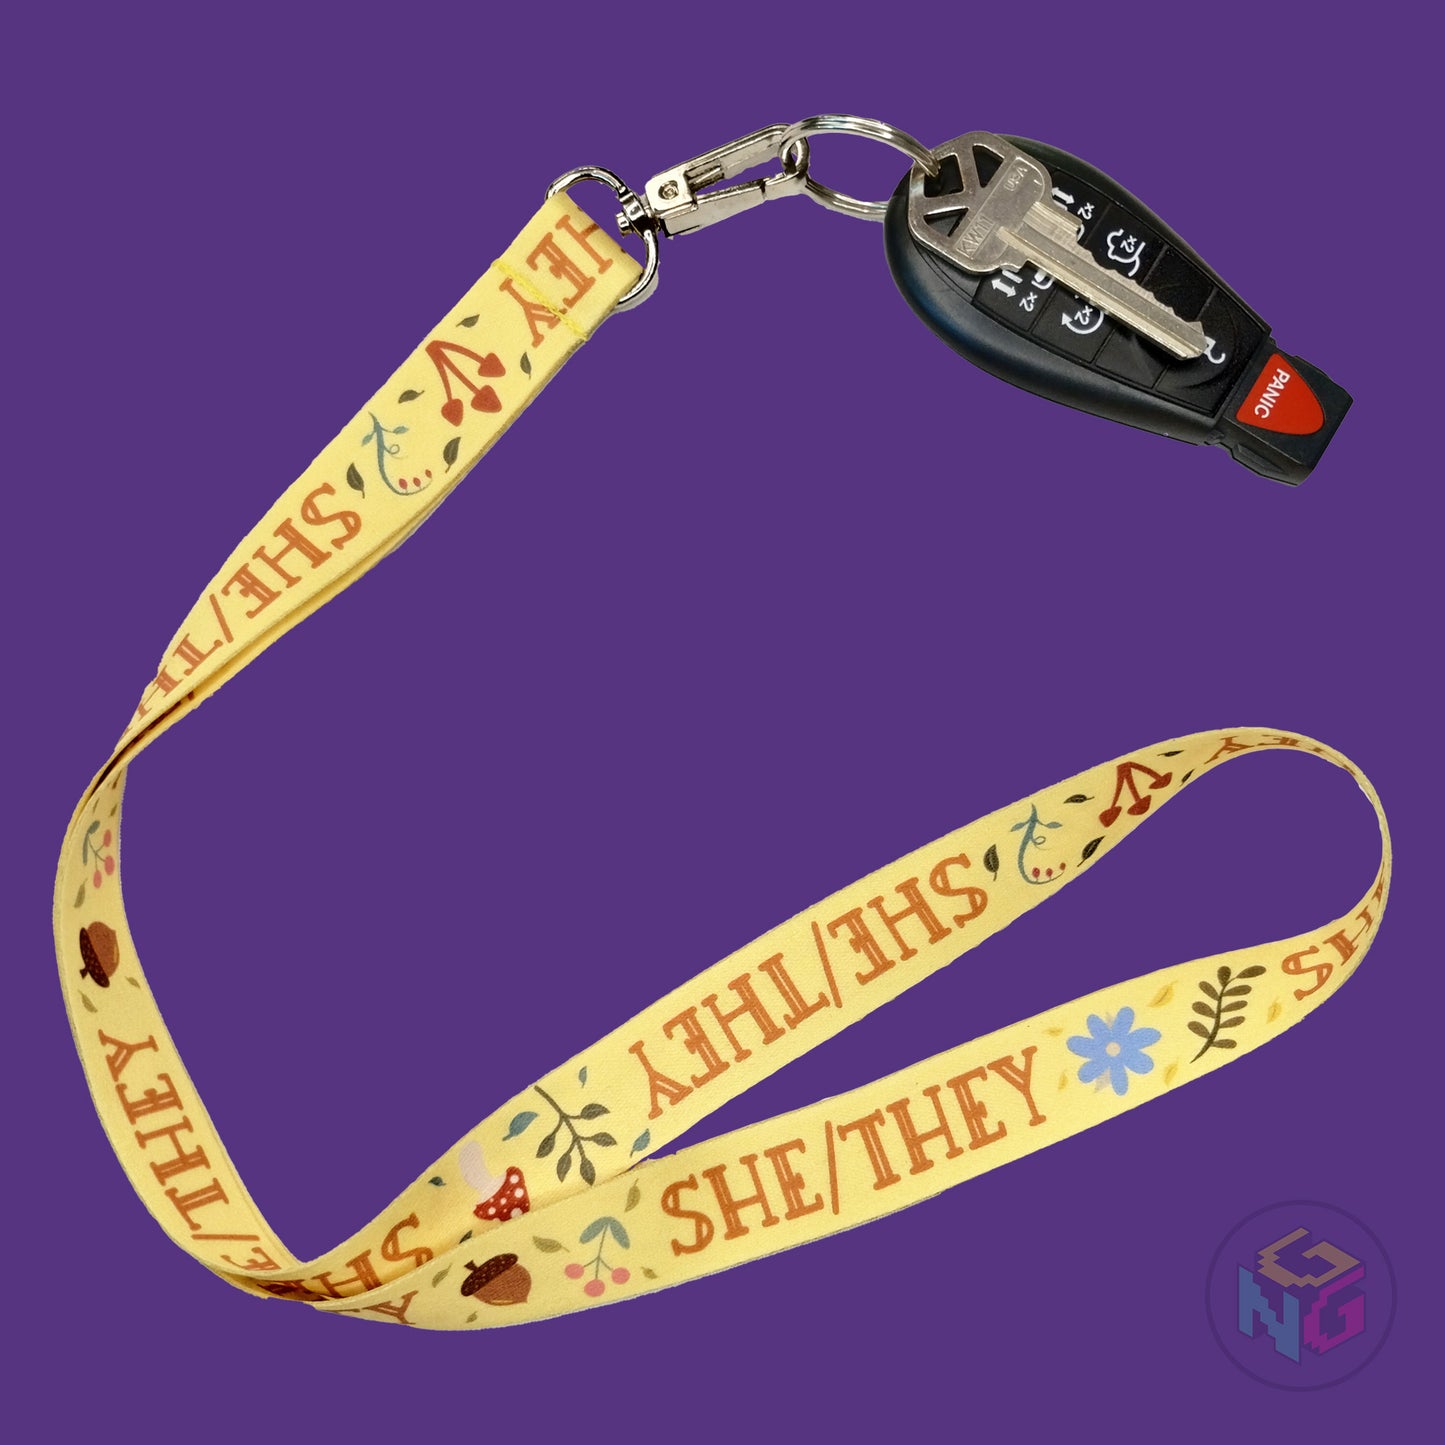 yellow she they pronoun lanyard showing the brown text, mushrooms, leaves, and flower details with a key fob clipped to the end of the lanyard